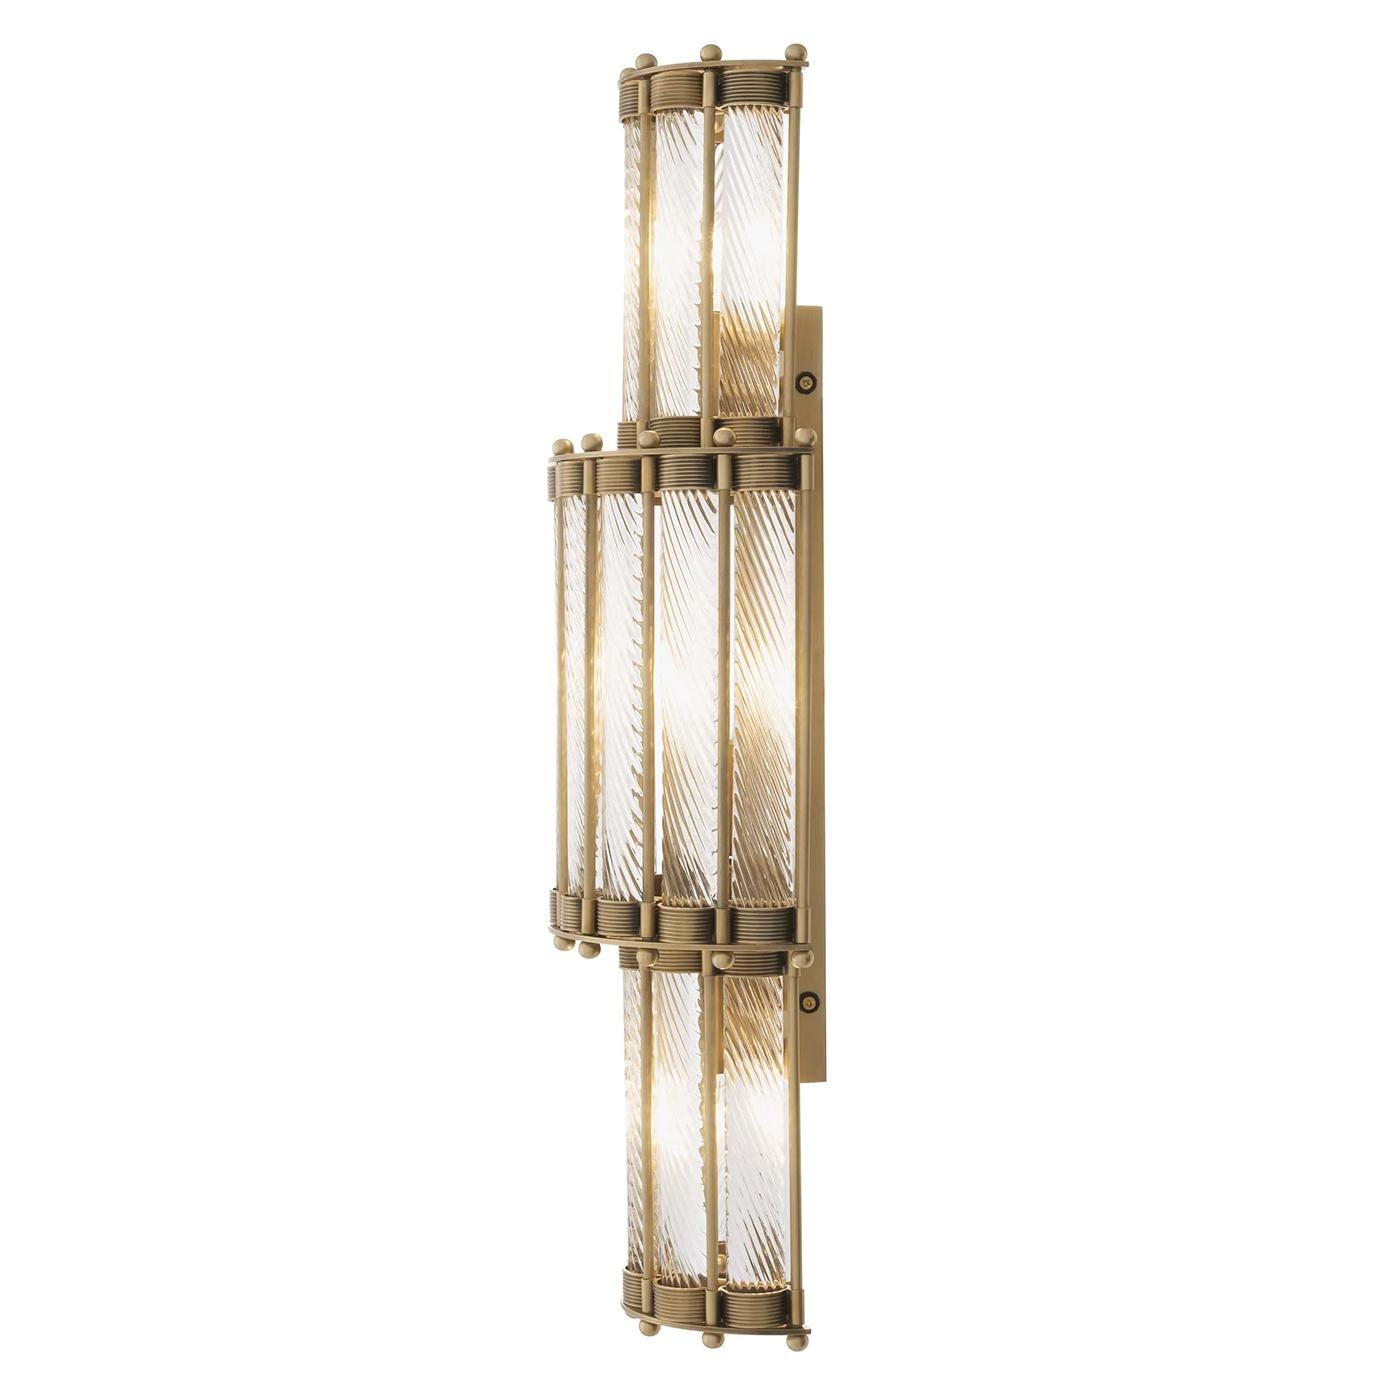 Wall Lamp Mezzo High with solid brass structure in
antique finish. With clear glass. 3 bulbs, lamp holder
type E14, 40 watt, 220-240 volt. Bulbs not included.
Dimmable, dimmer not included.